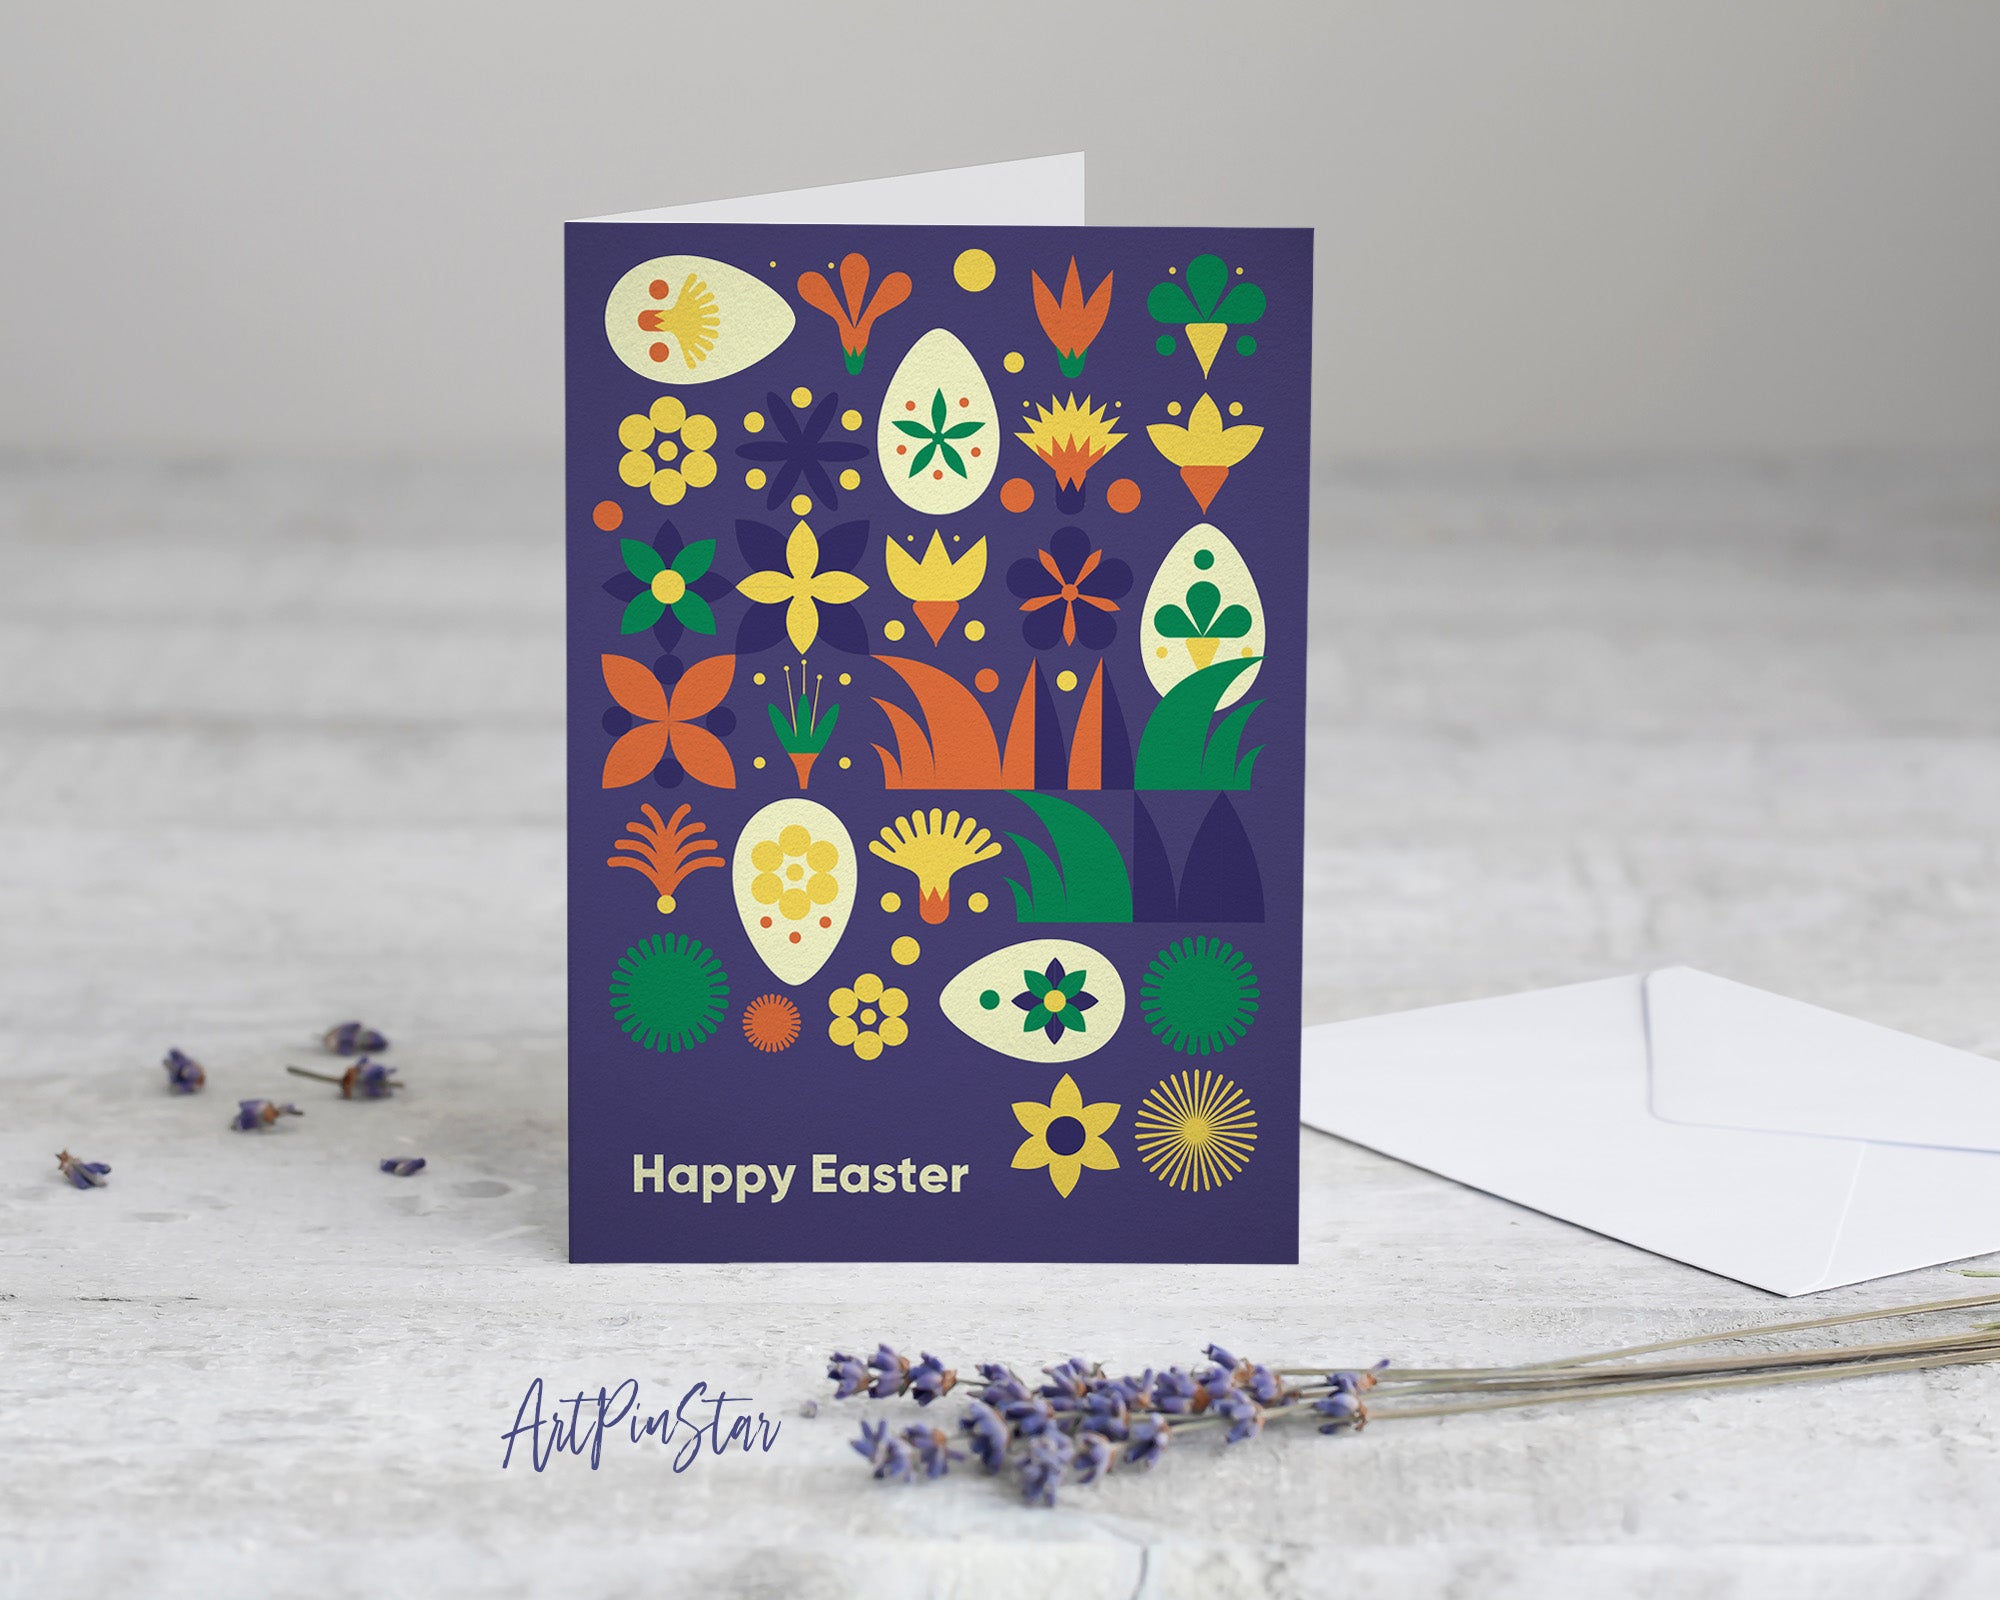 Modern Geometric Abstract Easter Eggs Rabbit Eggplant Customized Greeting Card